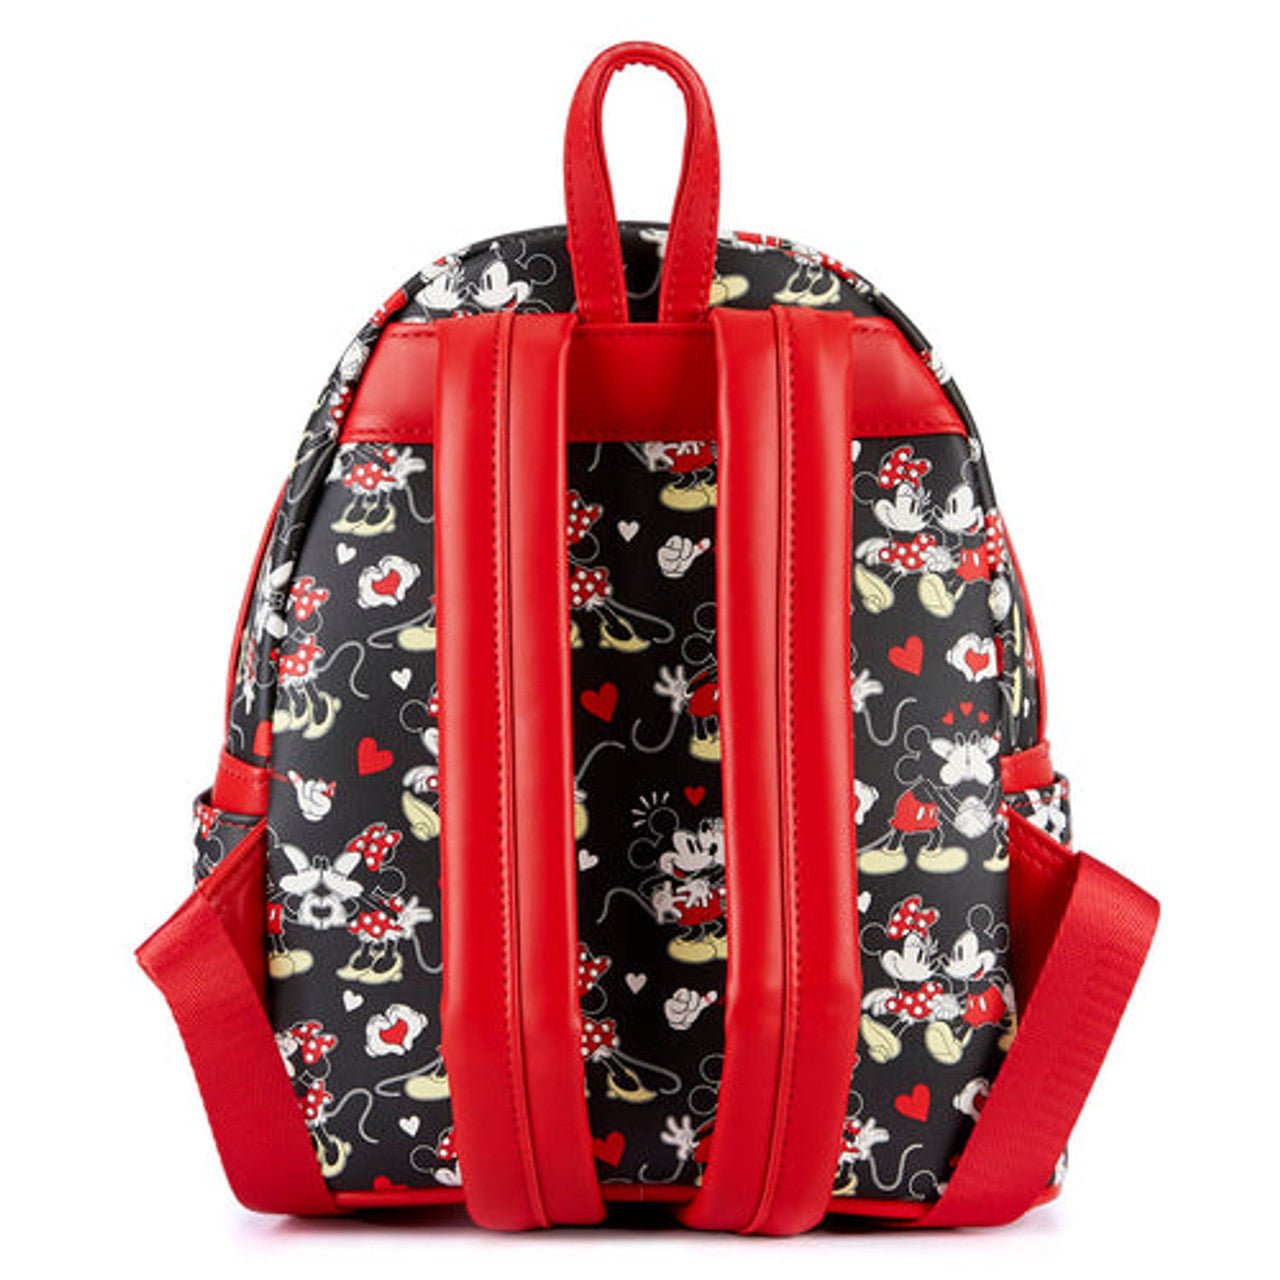 Mickey & Minnie Mouse Love Mini Backpack - Loungefly - 2